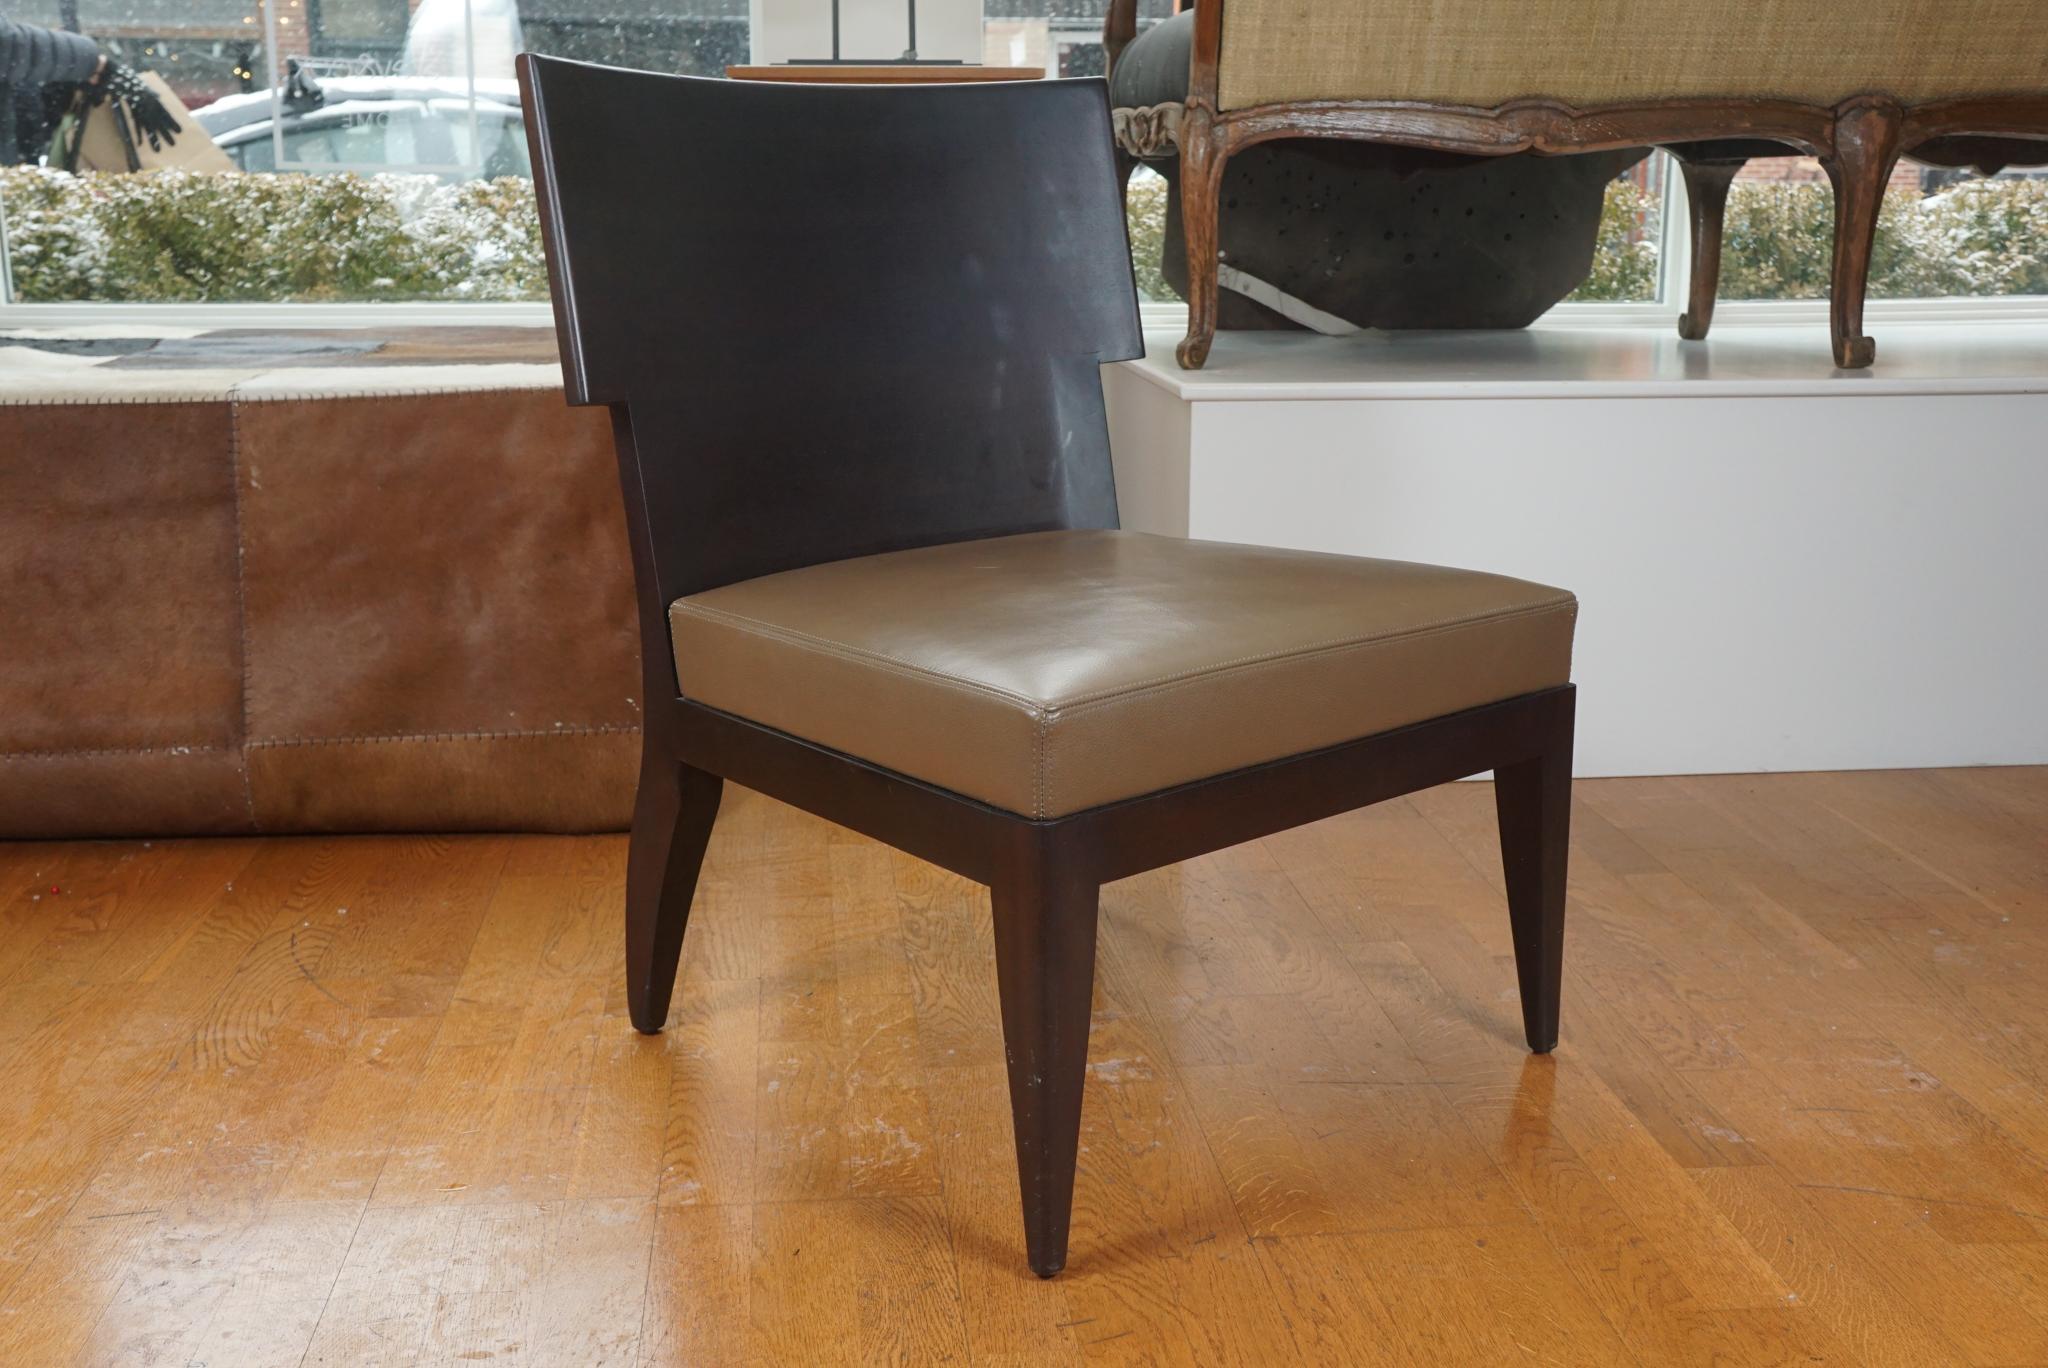 A sleek and shapely side chair designed by Christian Liaigre for Holly Hunt. This handsome chair has a finely detailed wood back and sits on a wood frame with tapered legs and a leather upholstered seat.